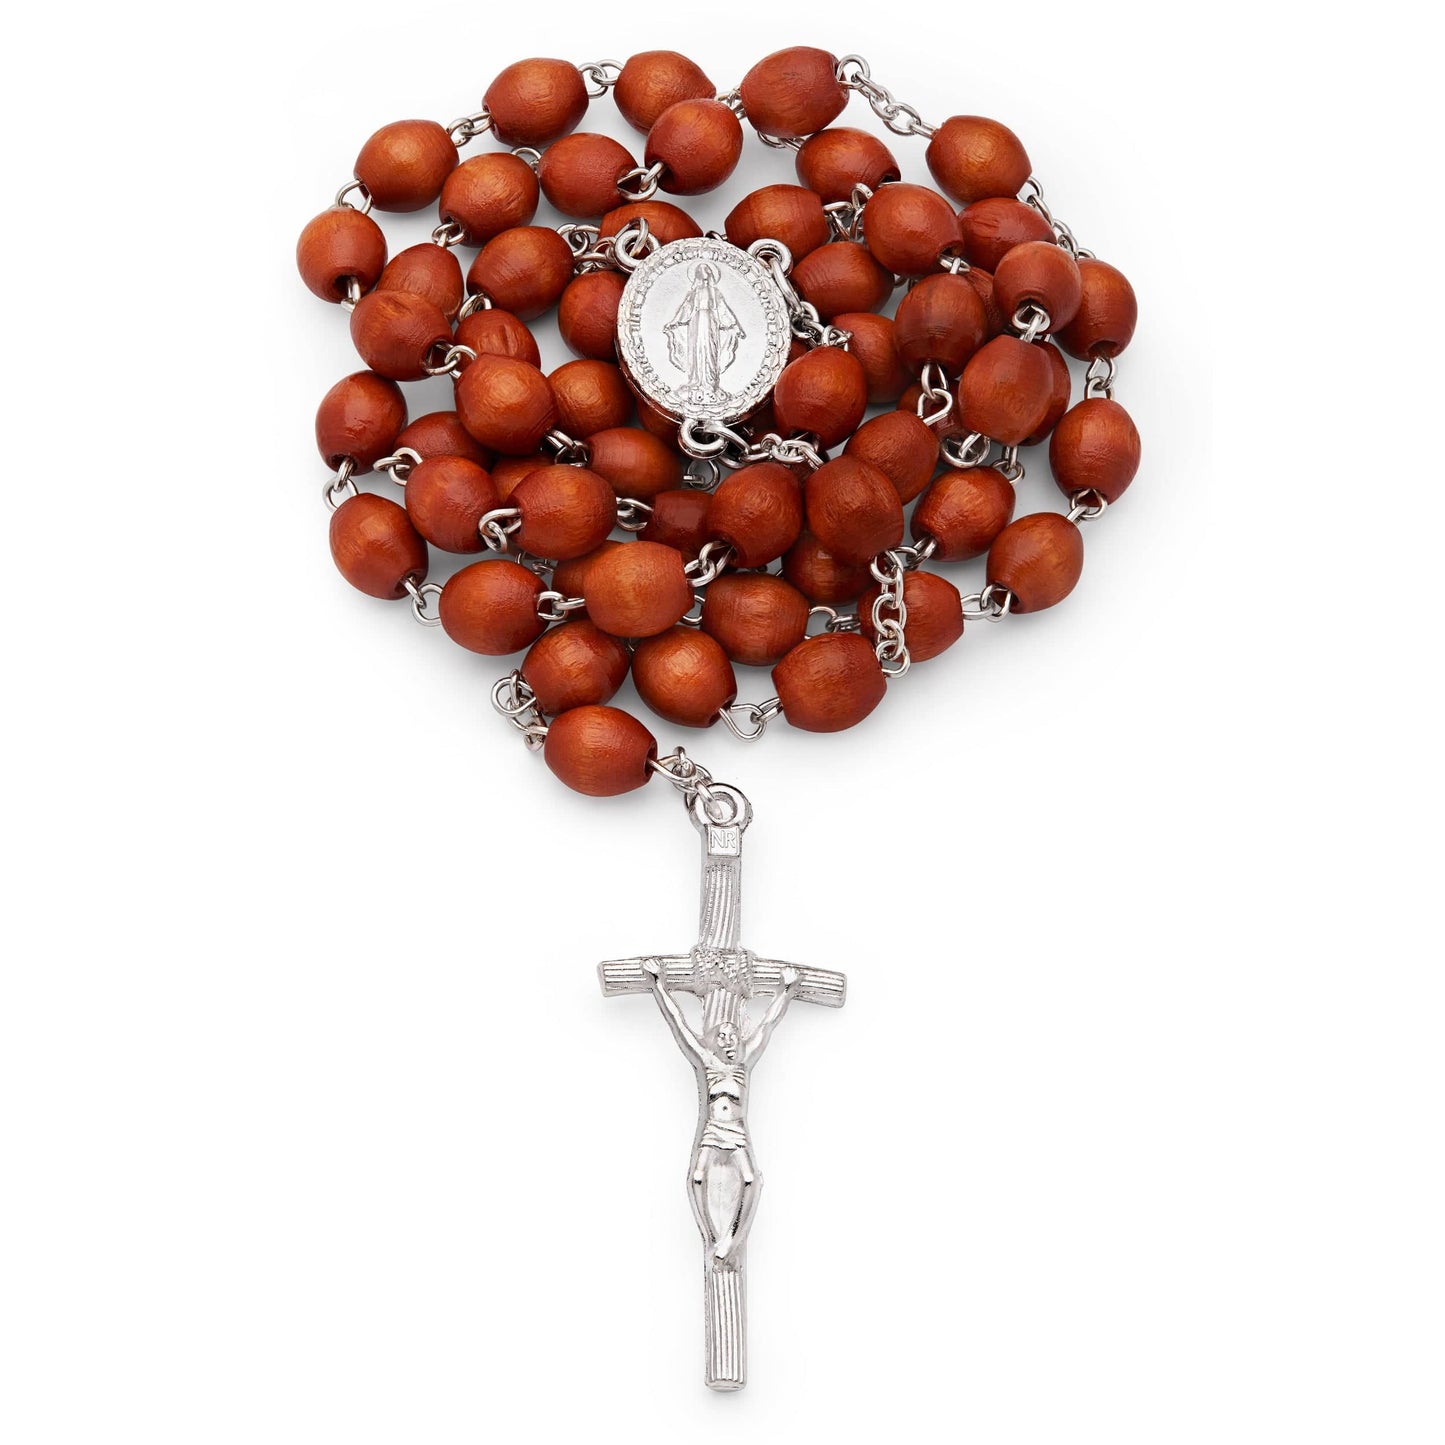 MONDO CATTOLICO Prayer Beads 53 cm (20.90 in) / 7 mm (0.30 in) Pope Francis White Case and Rosary